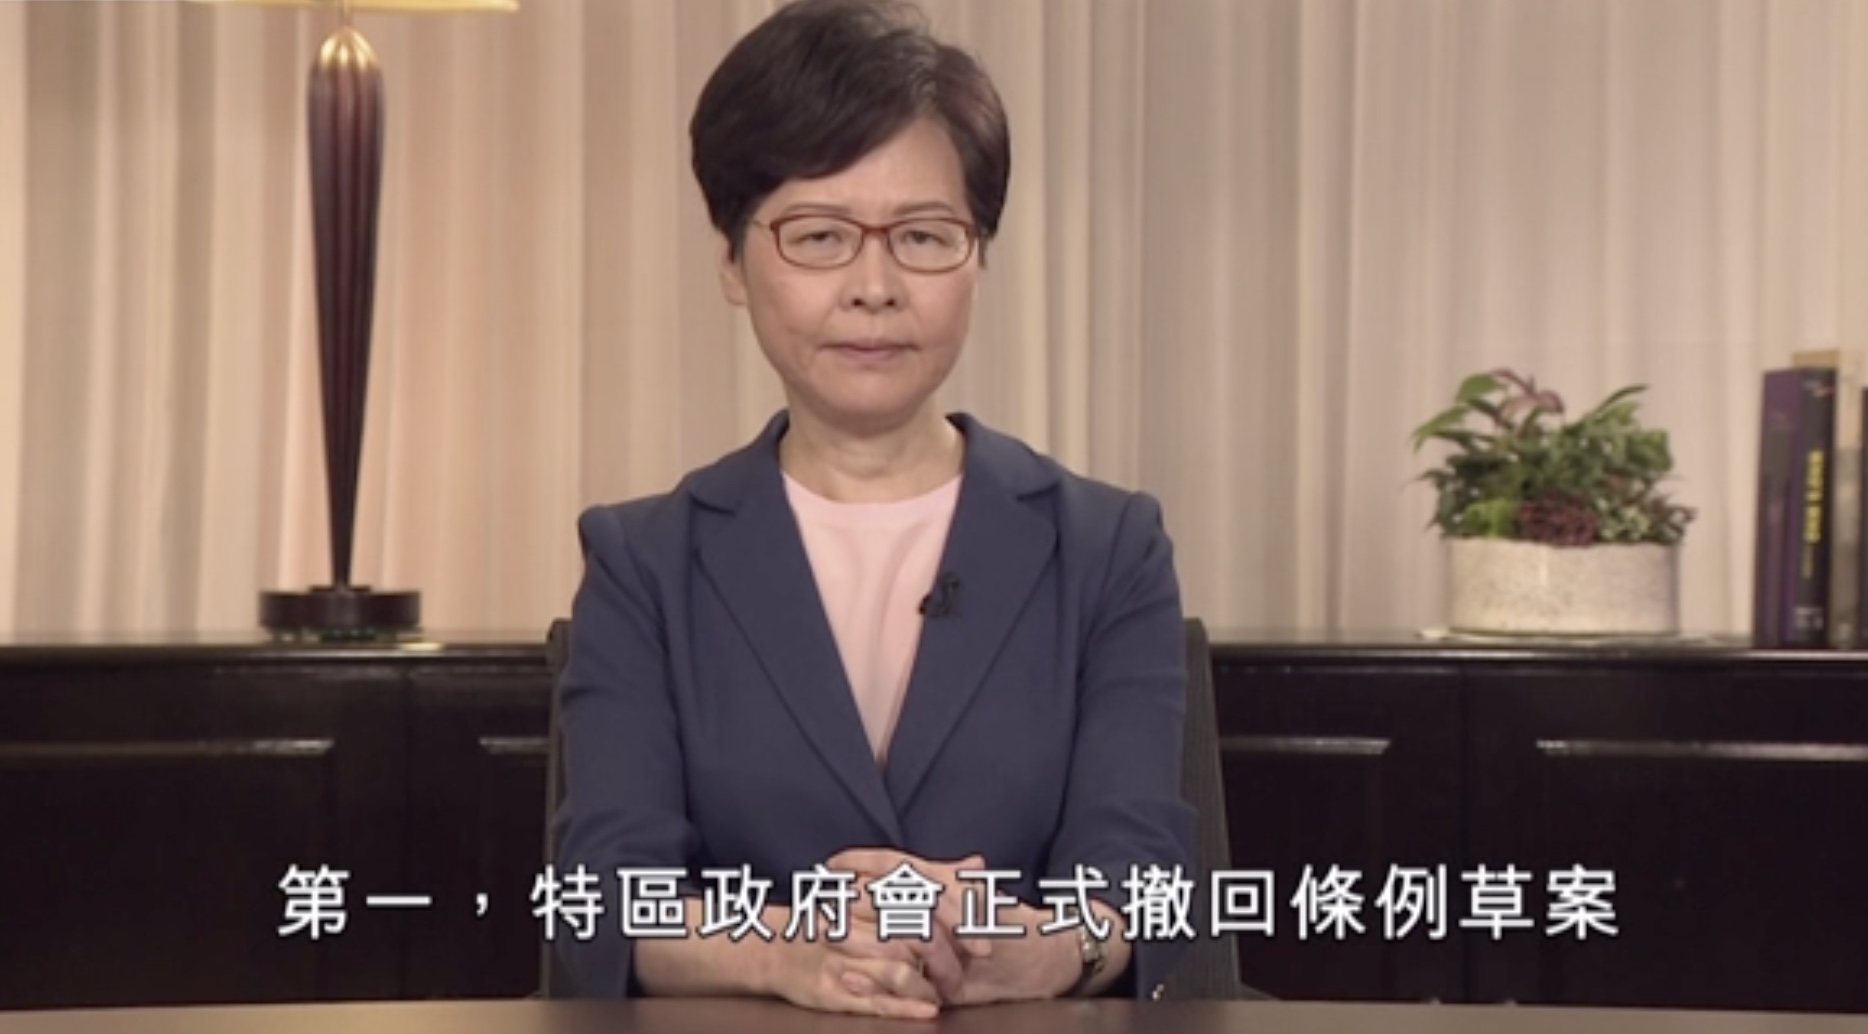 Chief Executive Carrie Lam gives a televised address in which she announced the full withdrawal of Hong Kong’s controversial extradition bill. Screengrab via Facebook.